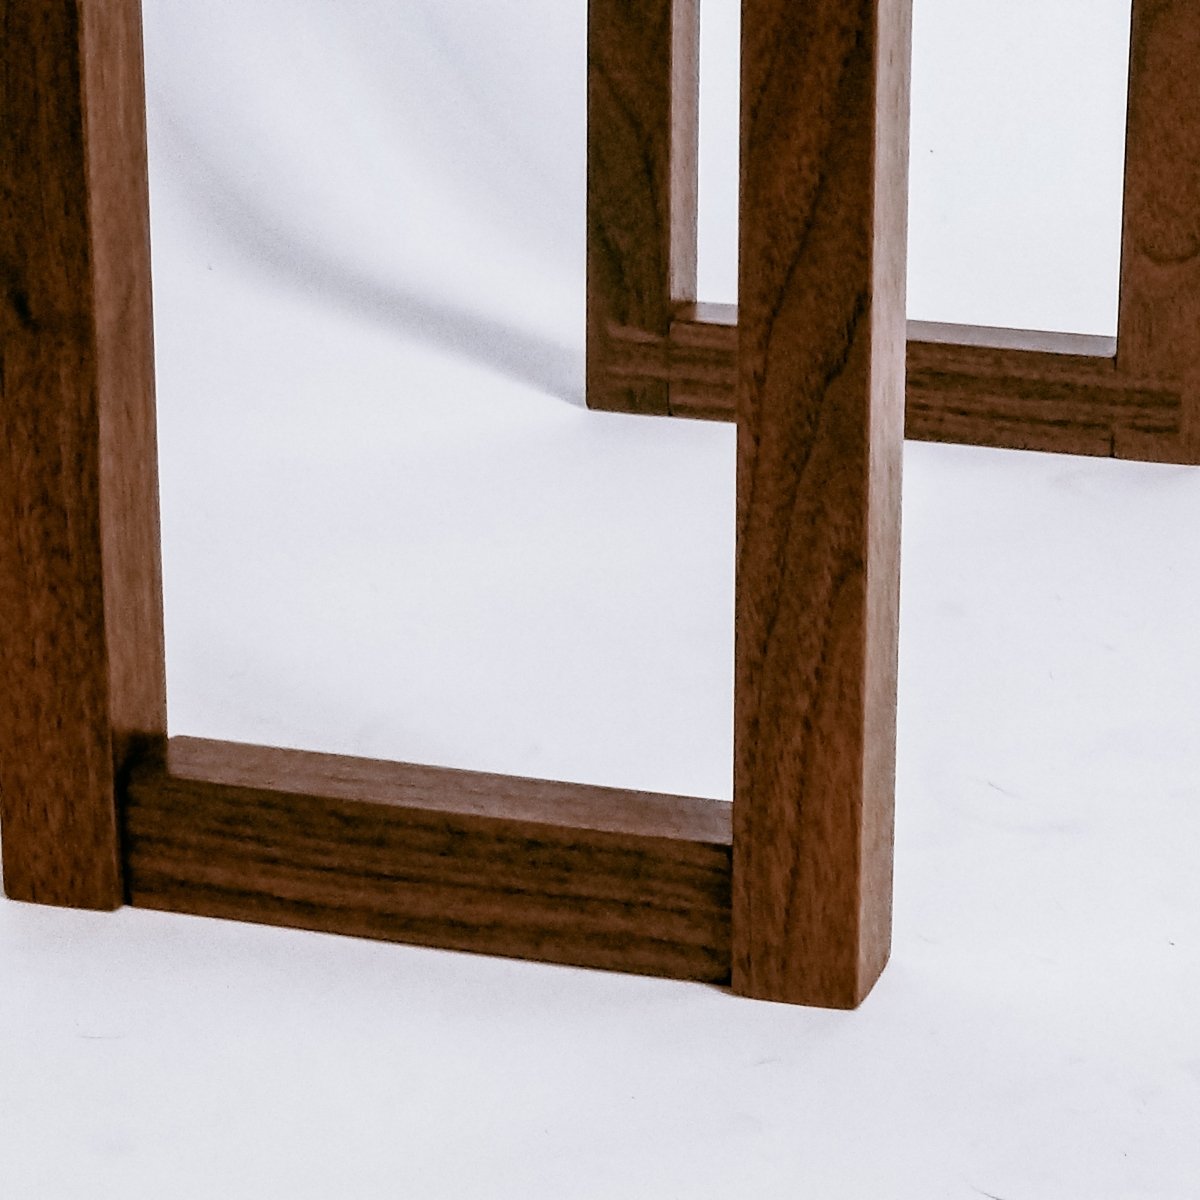 Our Live Edge Side Table features fine craftsmanship details like these dovetail feet